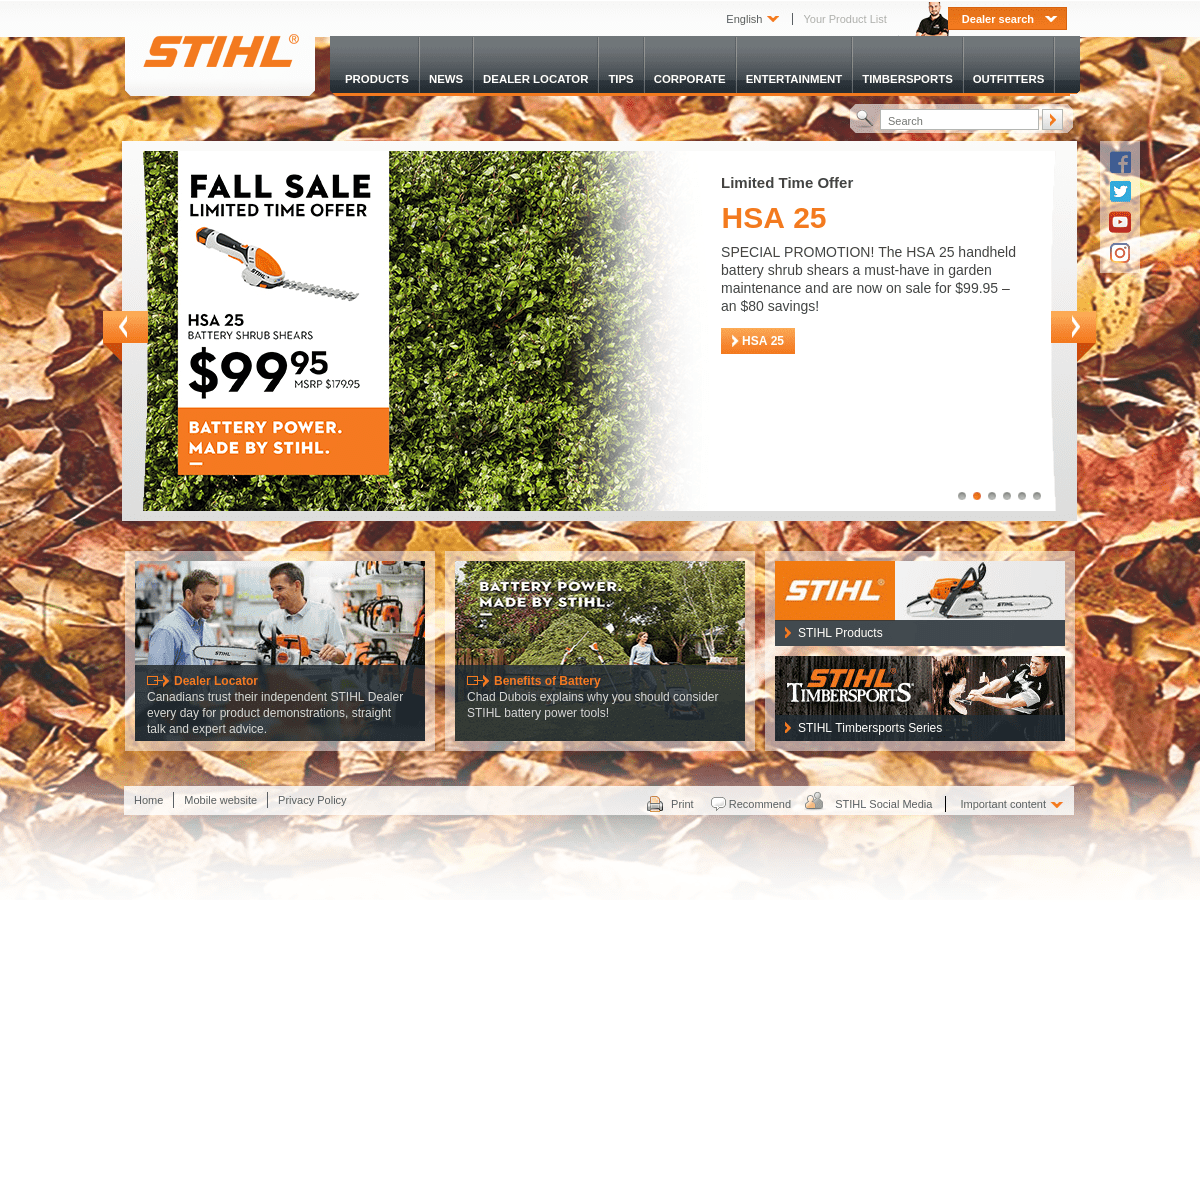 A complete backup of stihl.ca